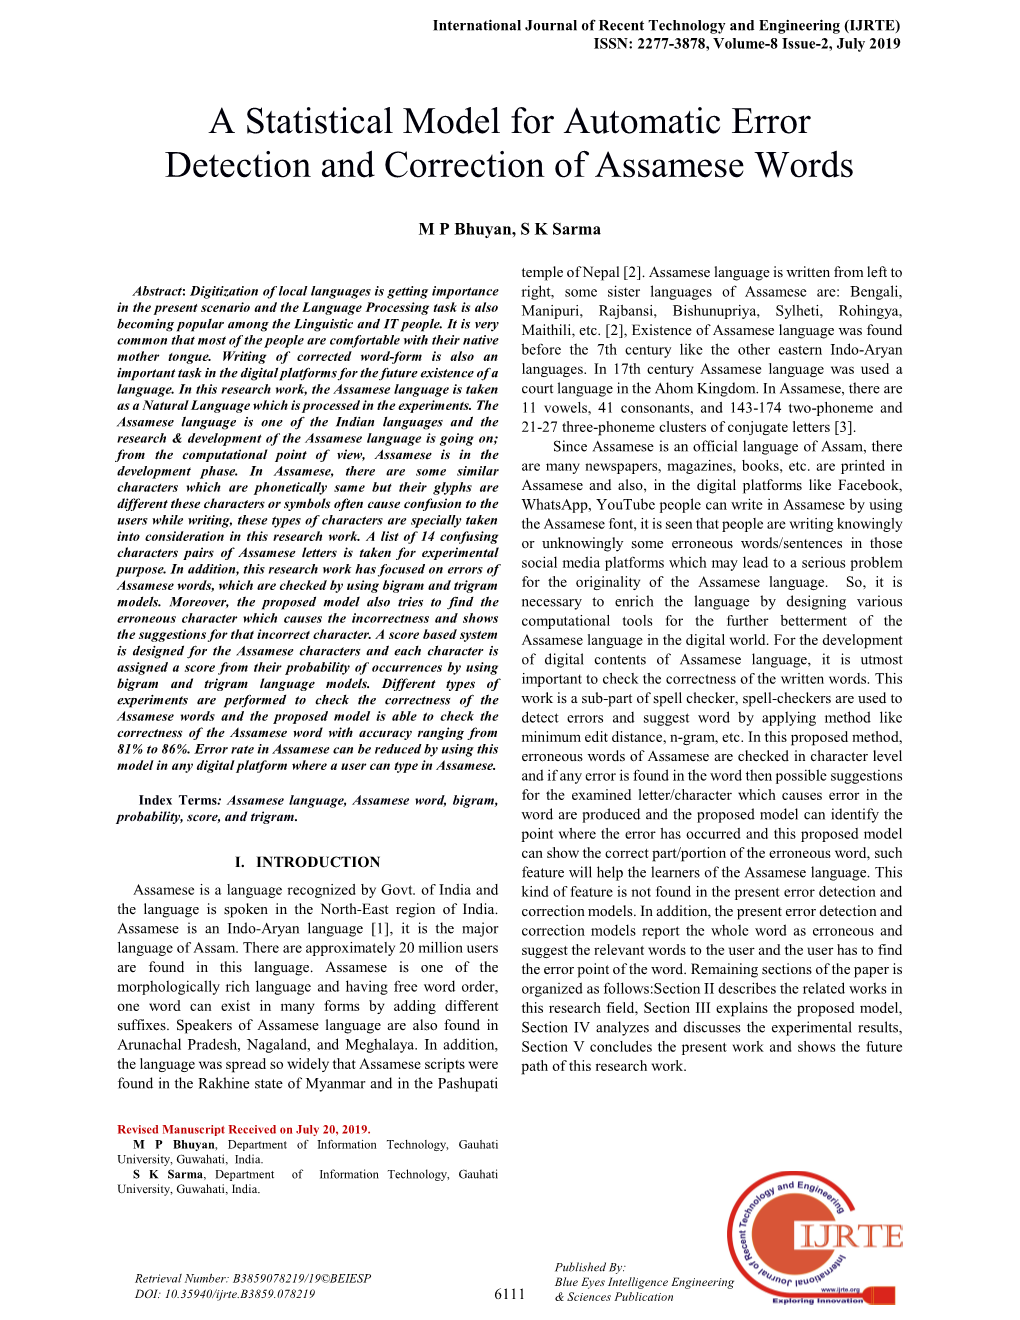 A Statistical Model for Automatic Error Detection and Correction of Assamese Words